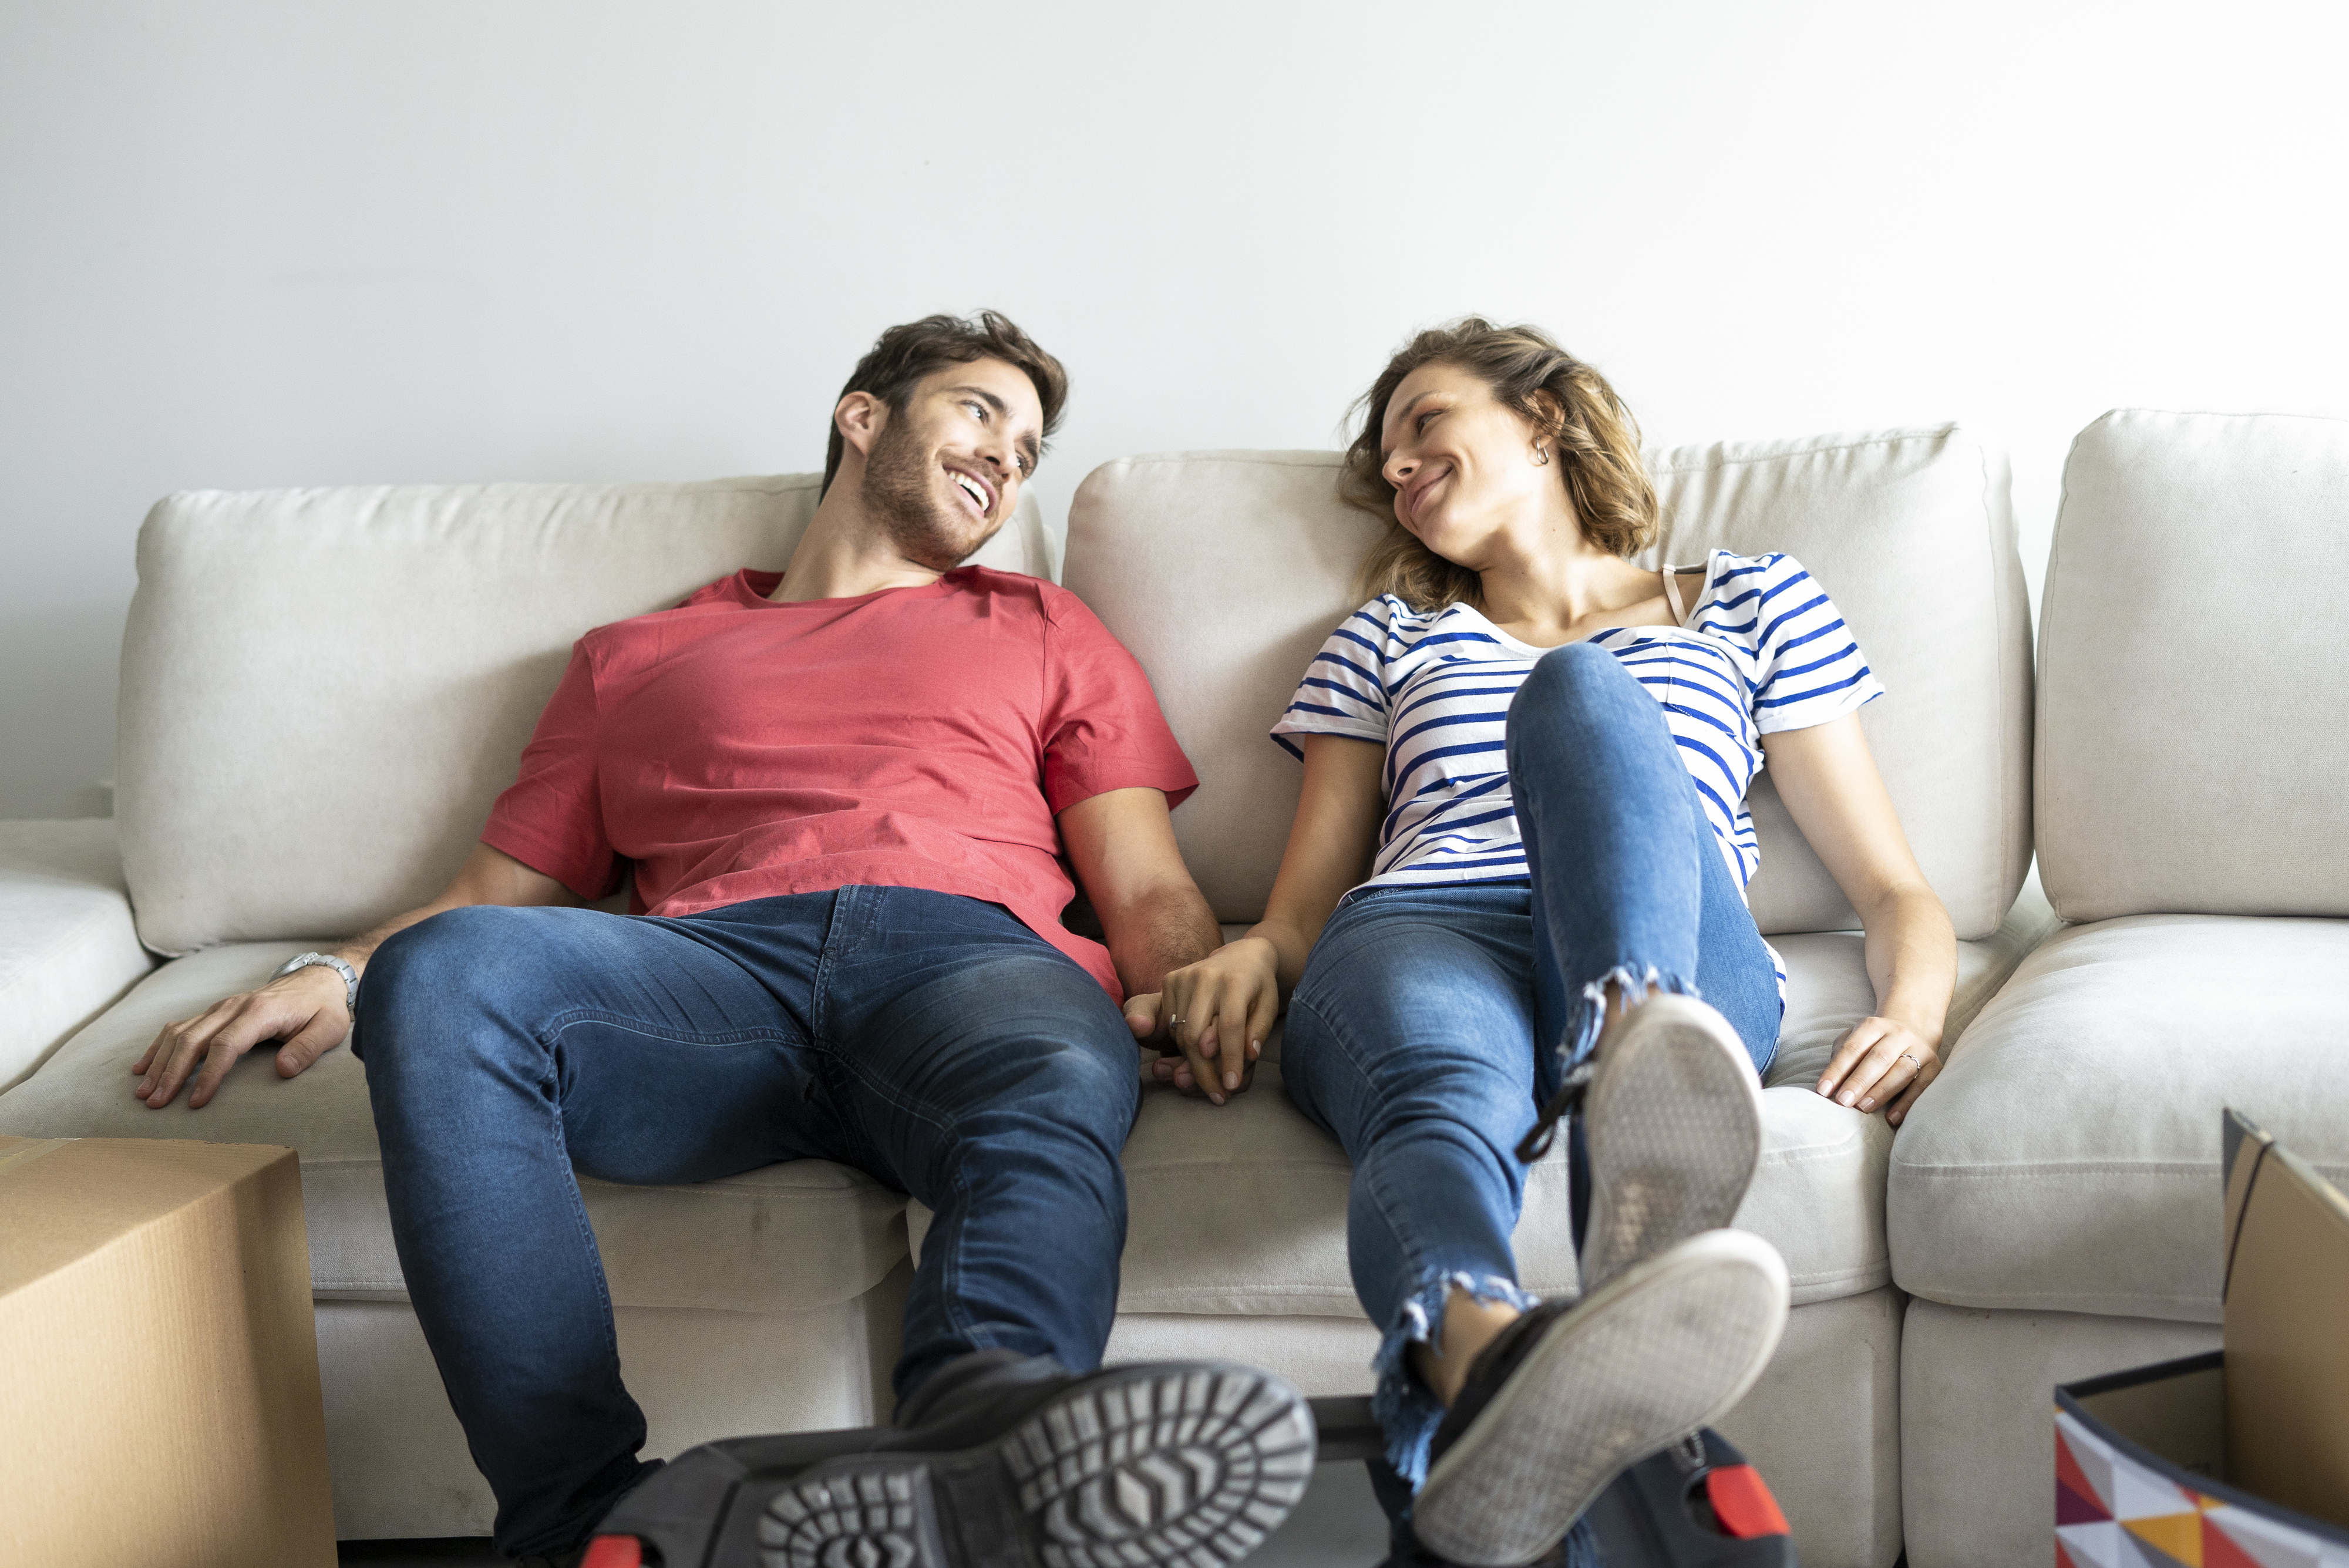 A couple, holding hands and smiling at each other, relaxes on a couch surrounded by cardboard boxes